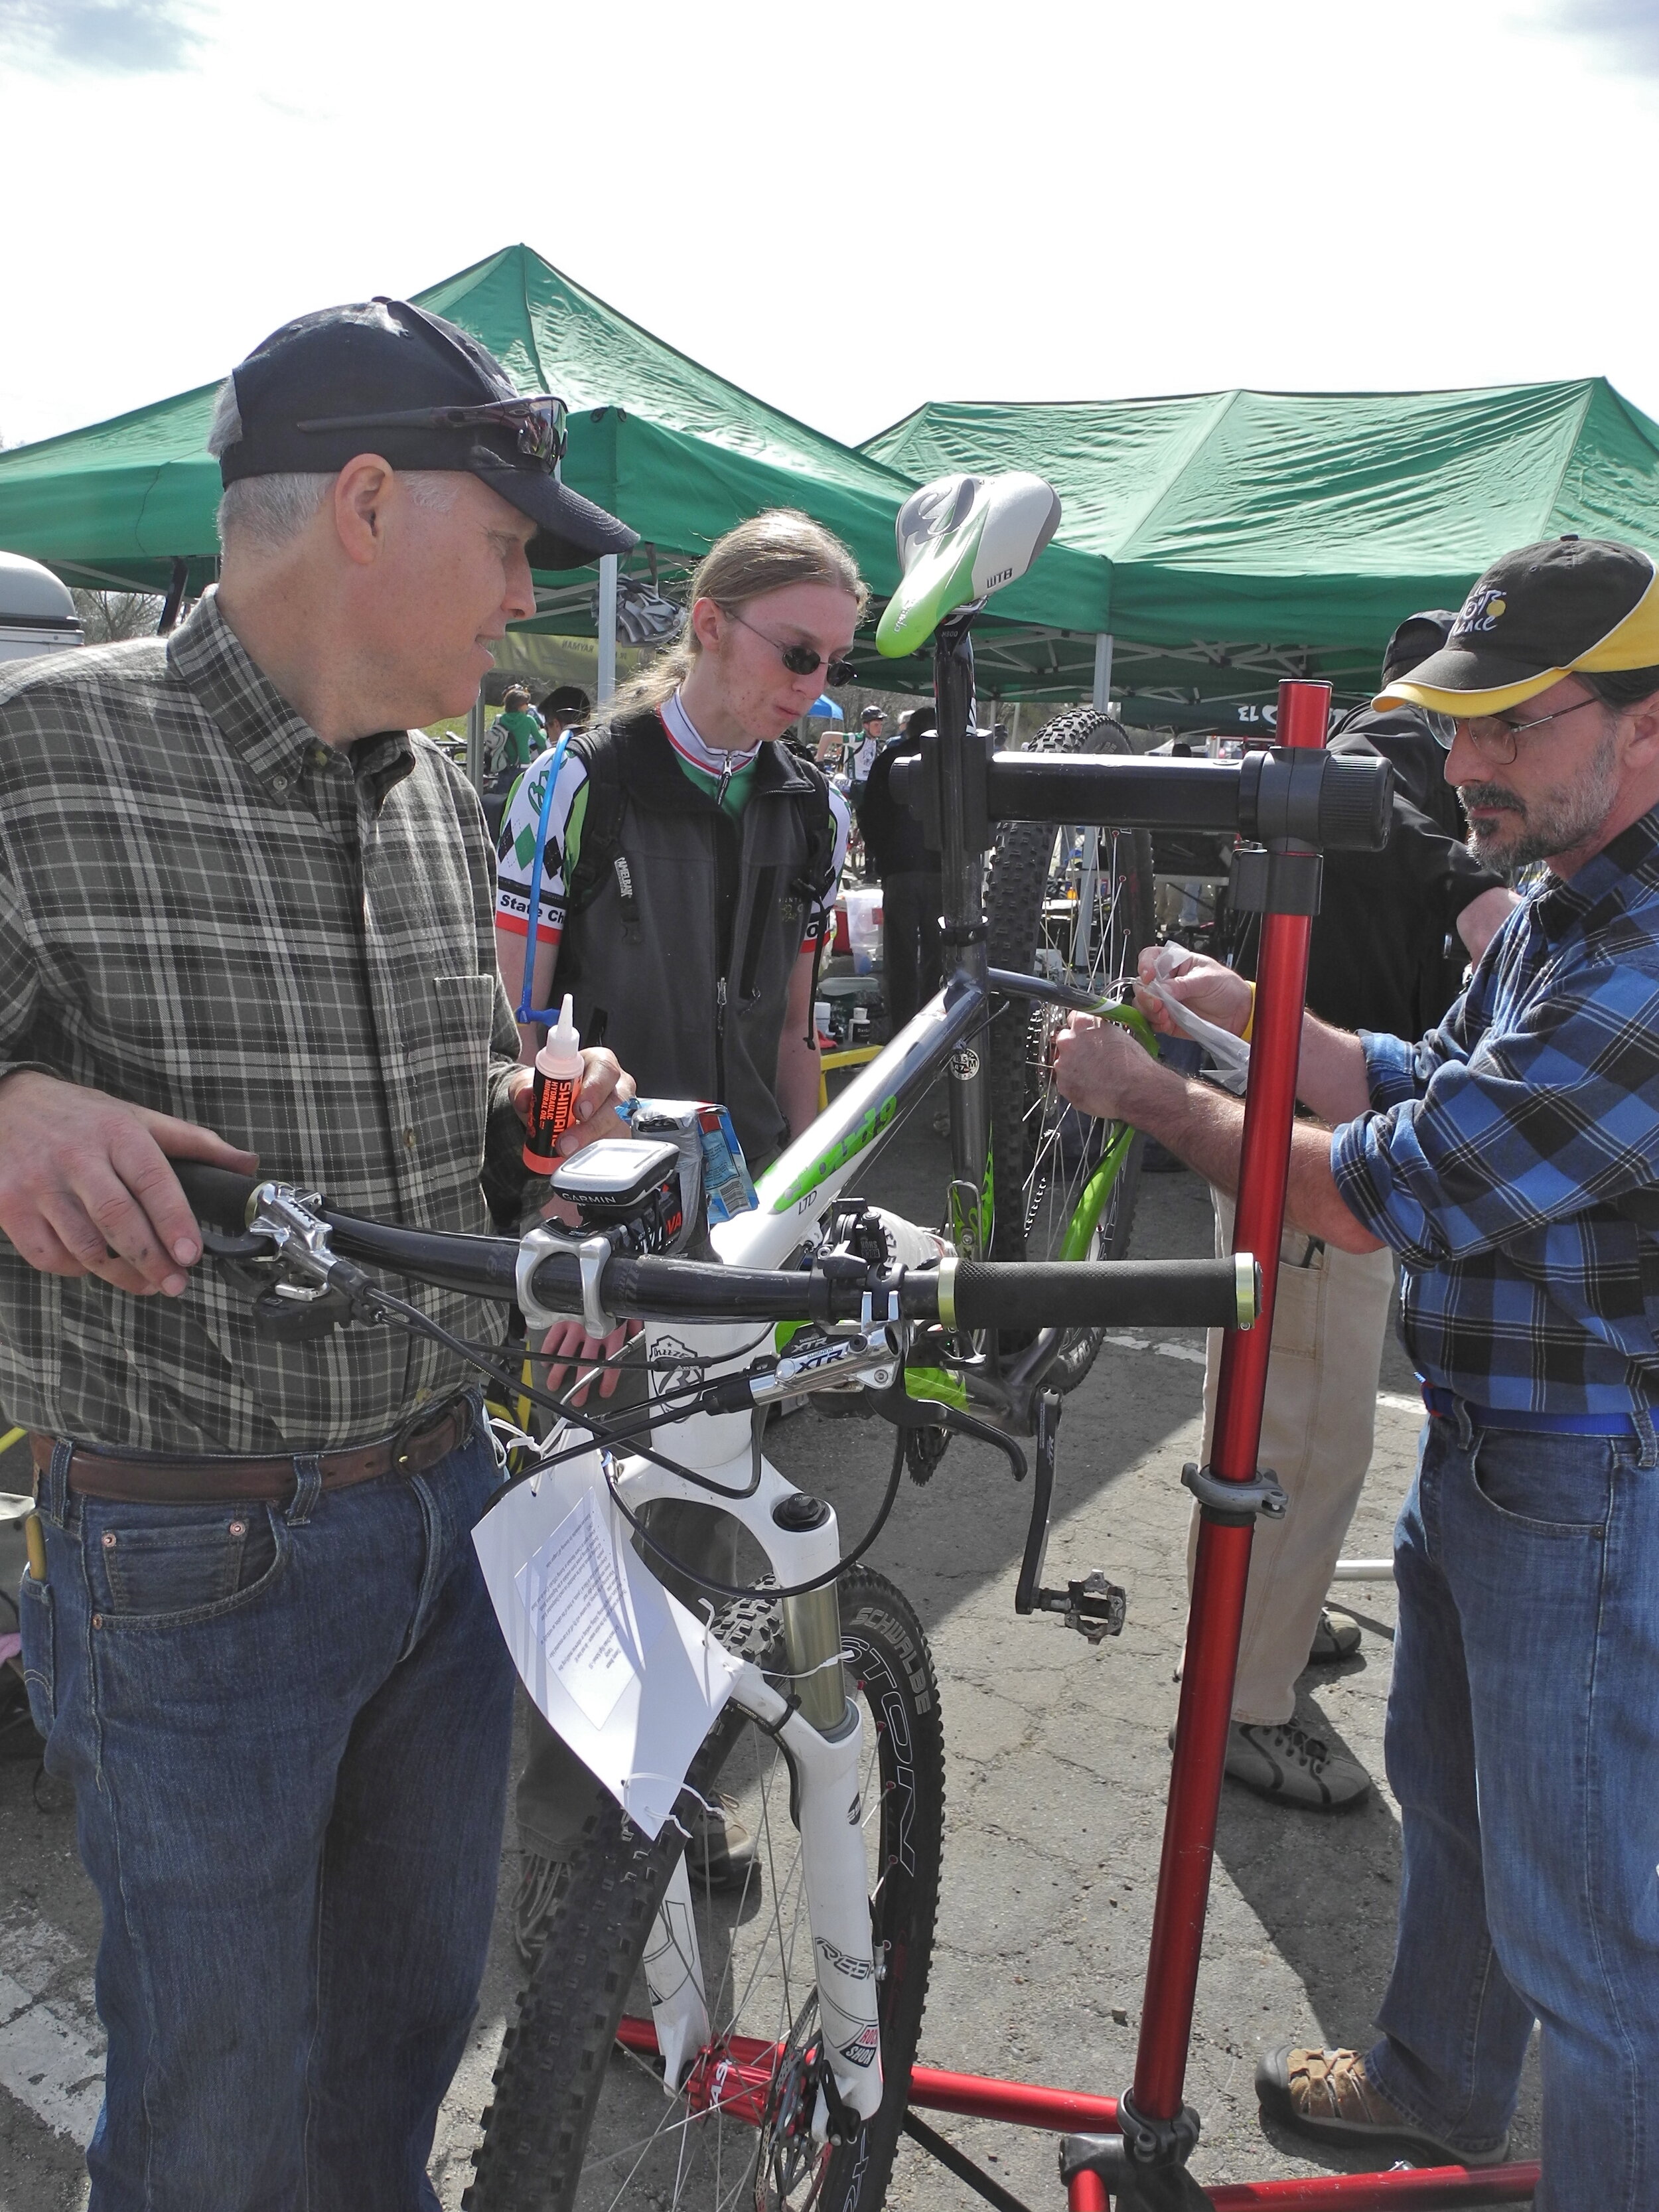   There might even be a famous pioneer mountain biker &amp; charter member of the Mountain Bike Hall of Fame, like Joe Breeze (left), helping out. 